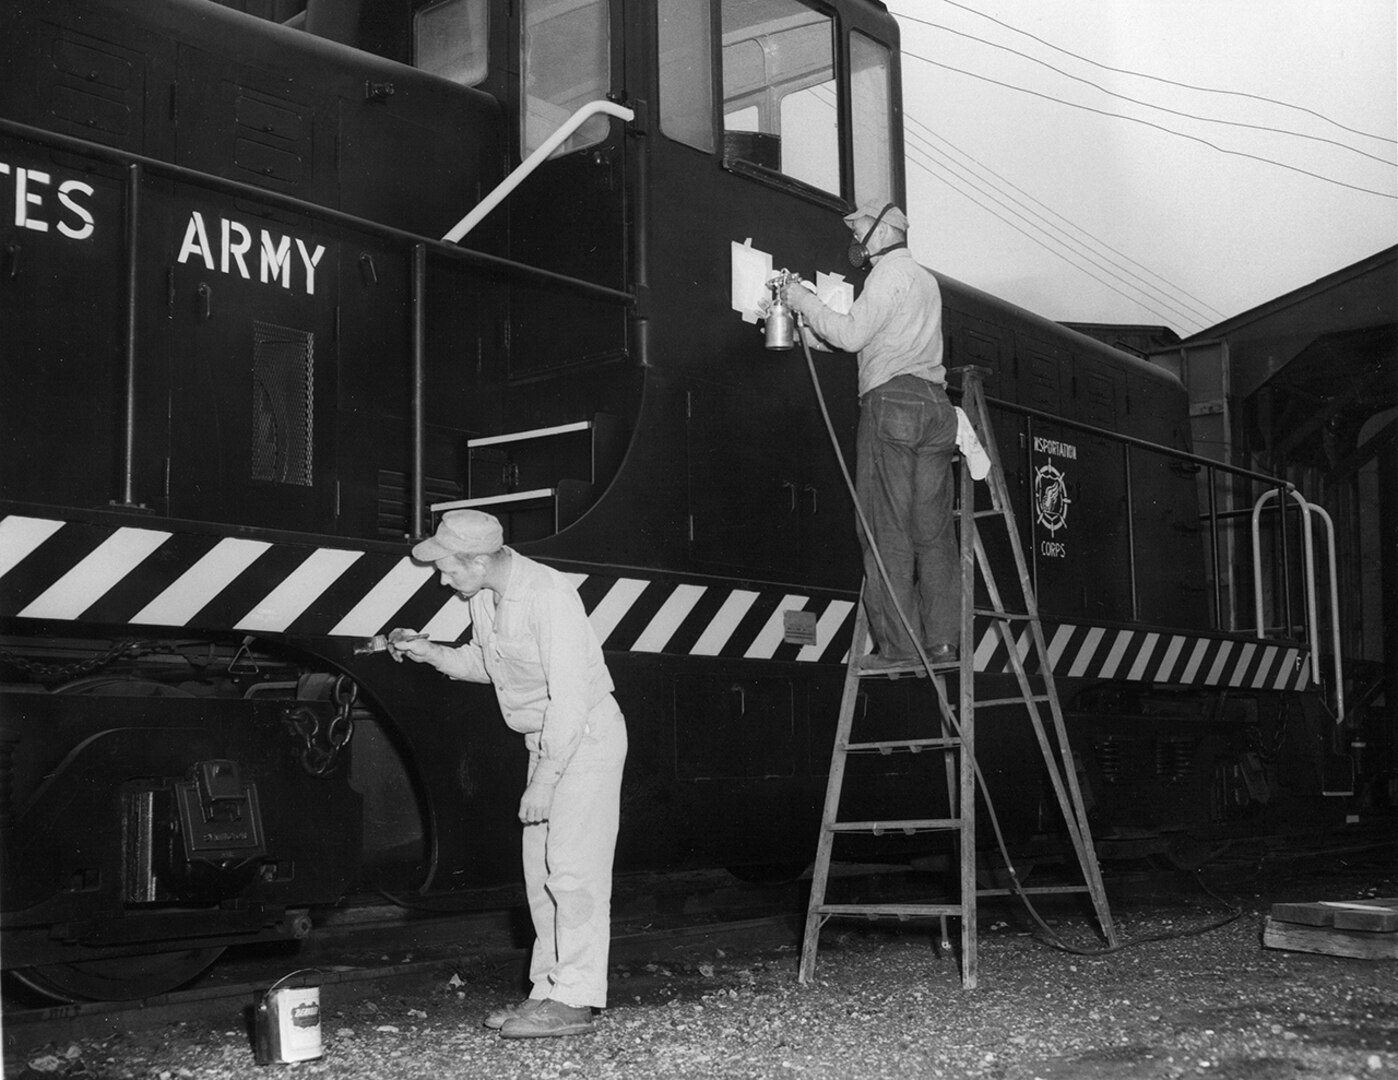 Workers refresh paint on a train engine at the New Cumberland Army Depot during the late 1960s.